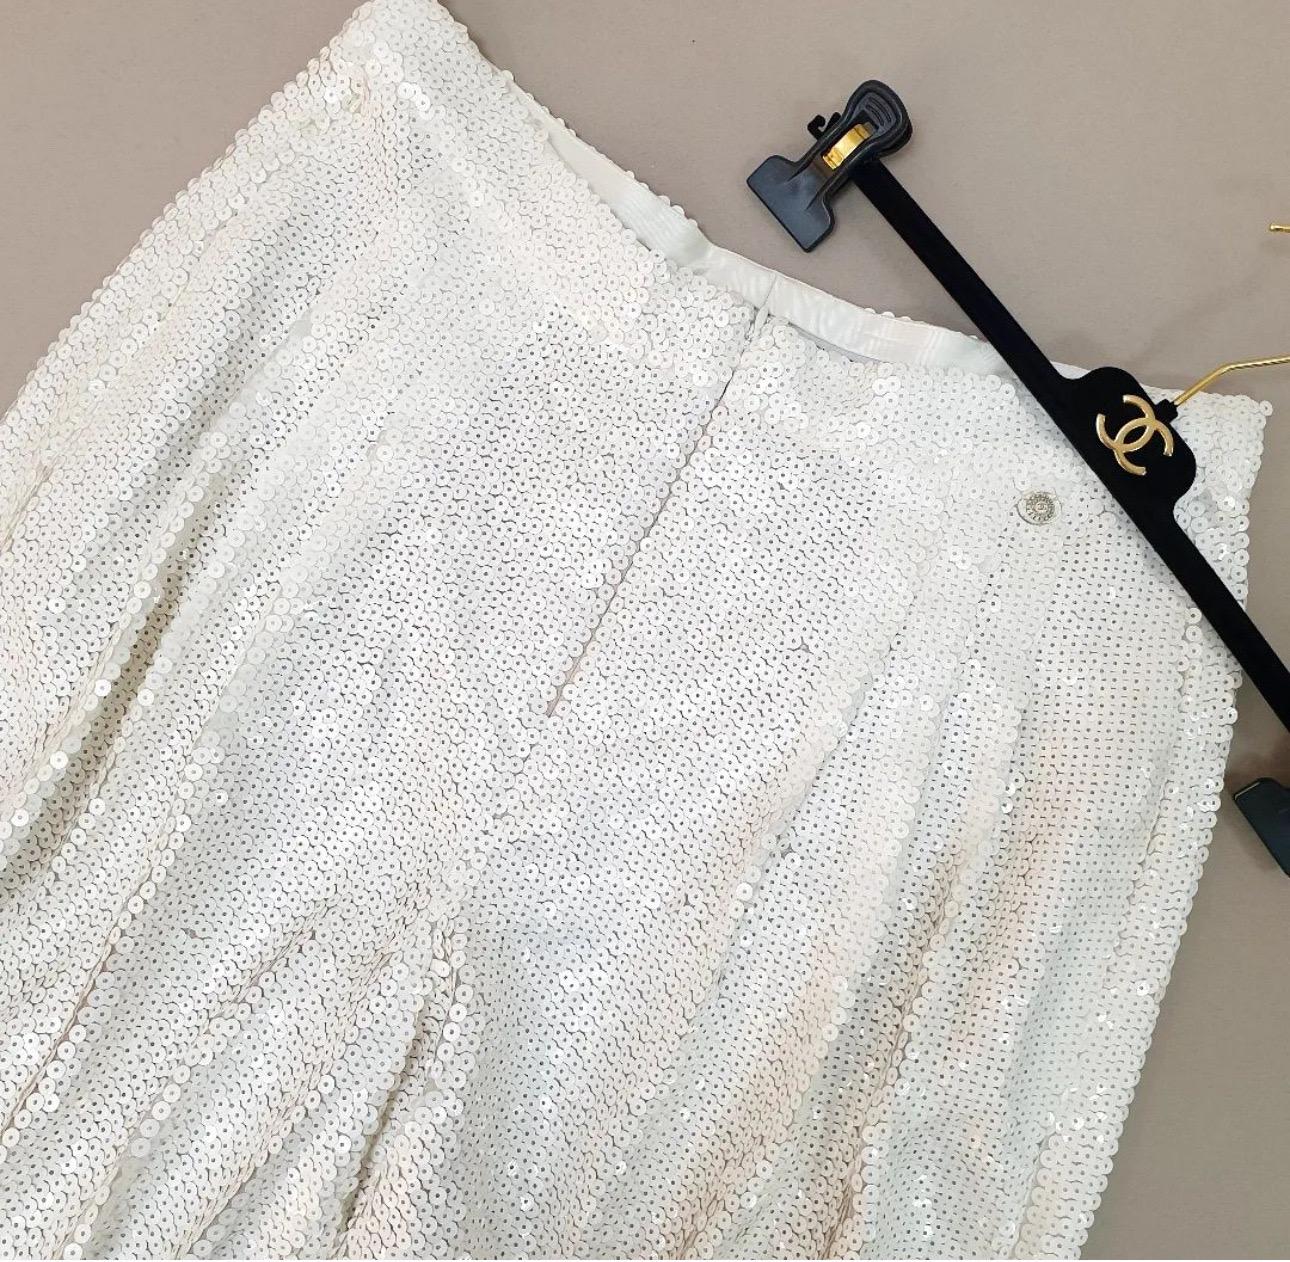 Chanel Kirsten Stewart White Pants Trousers  In Excellent Condition For Sale In Krakow, PL